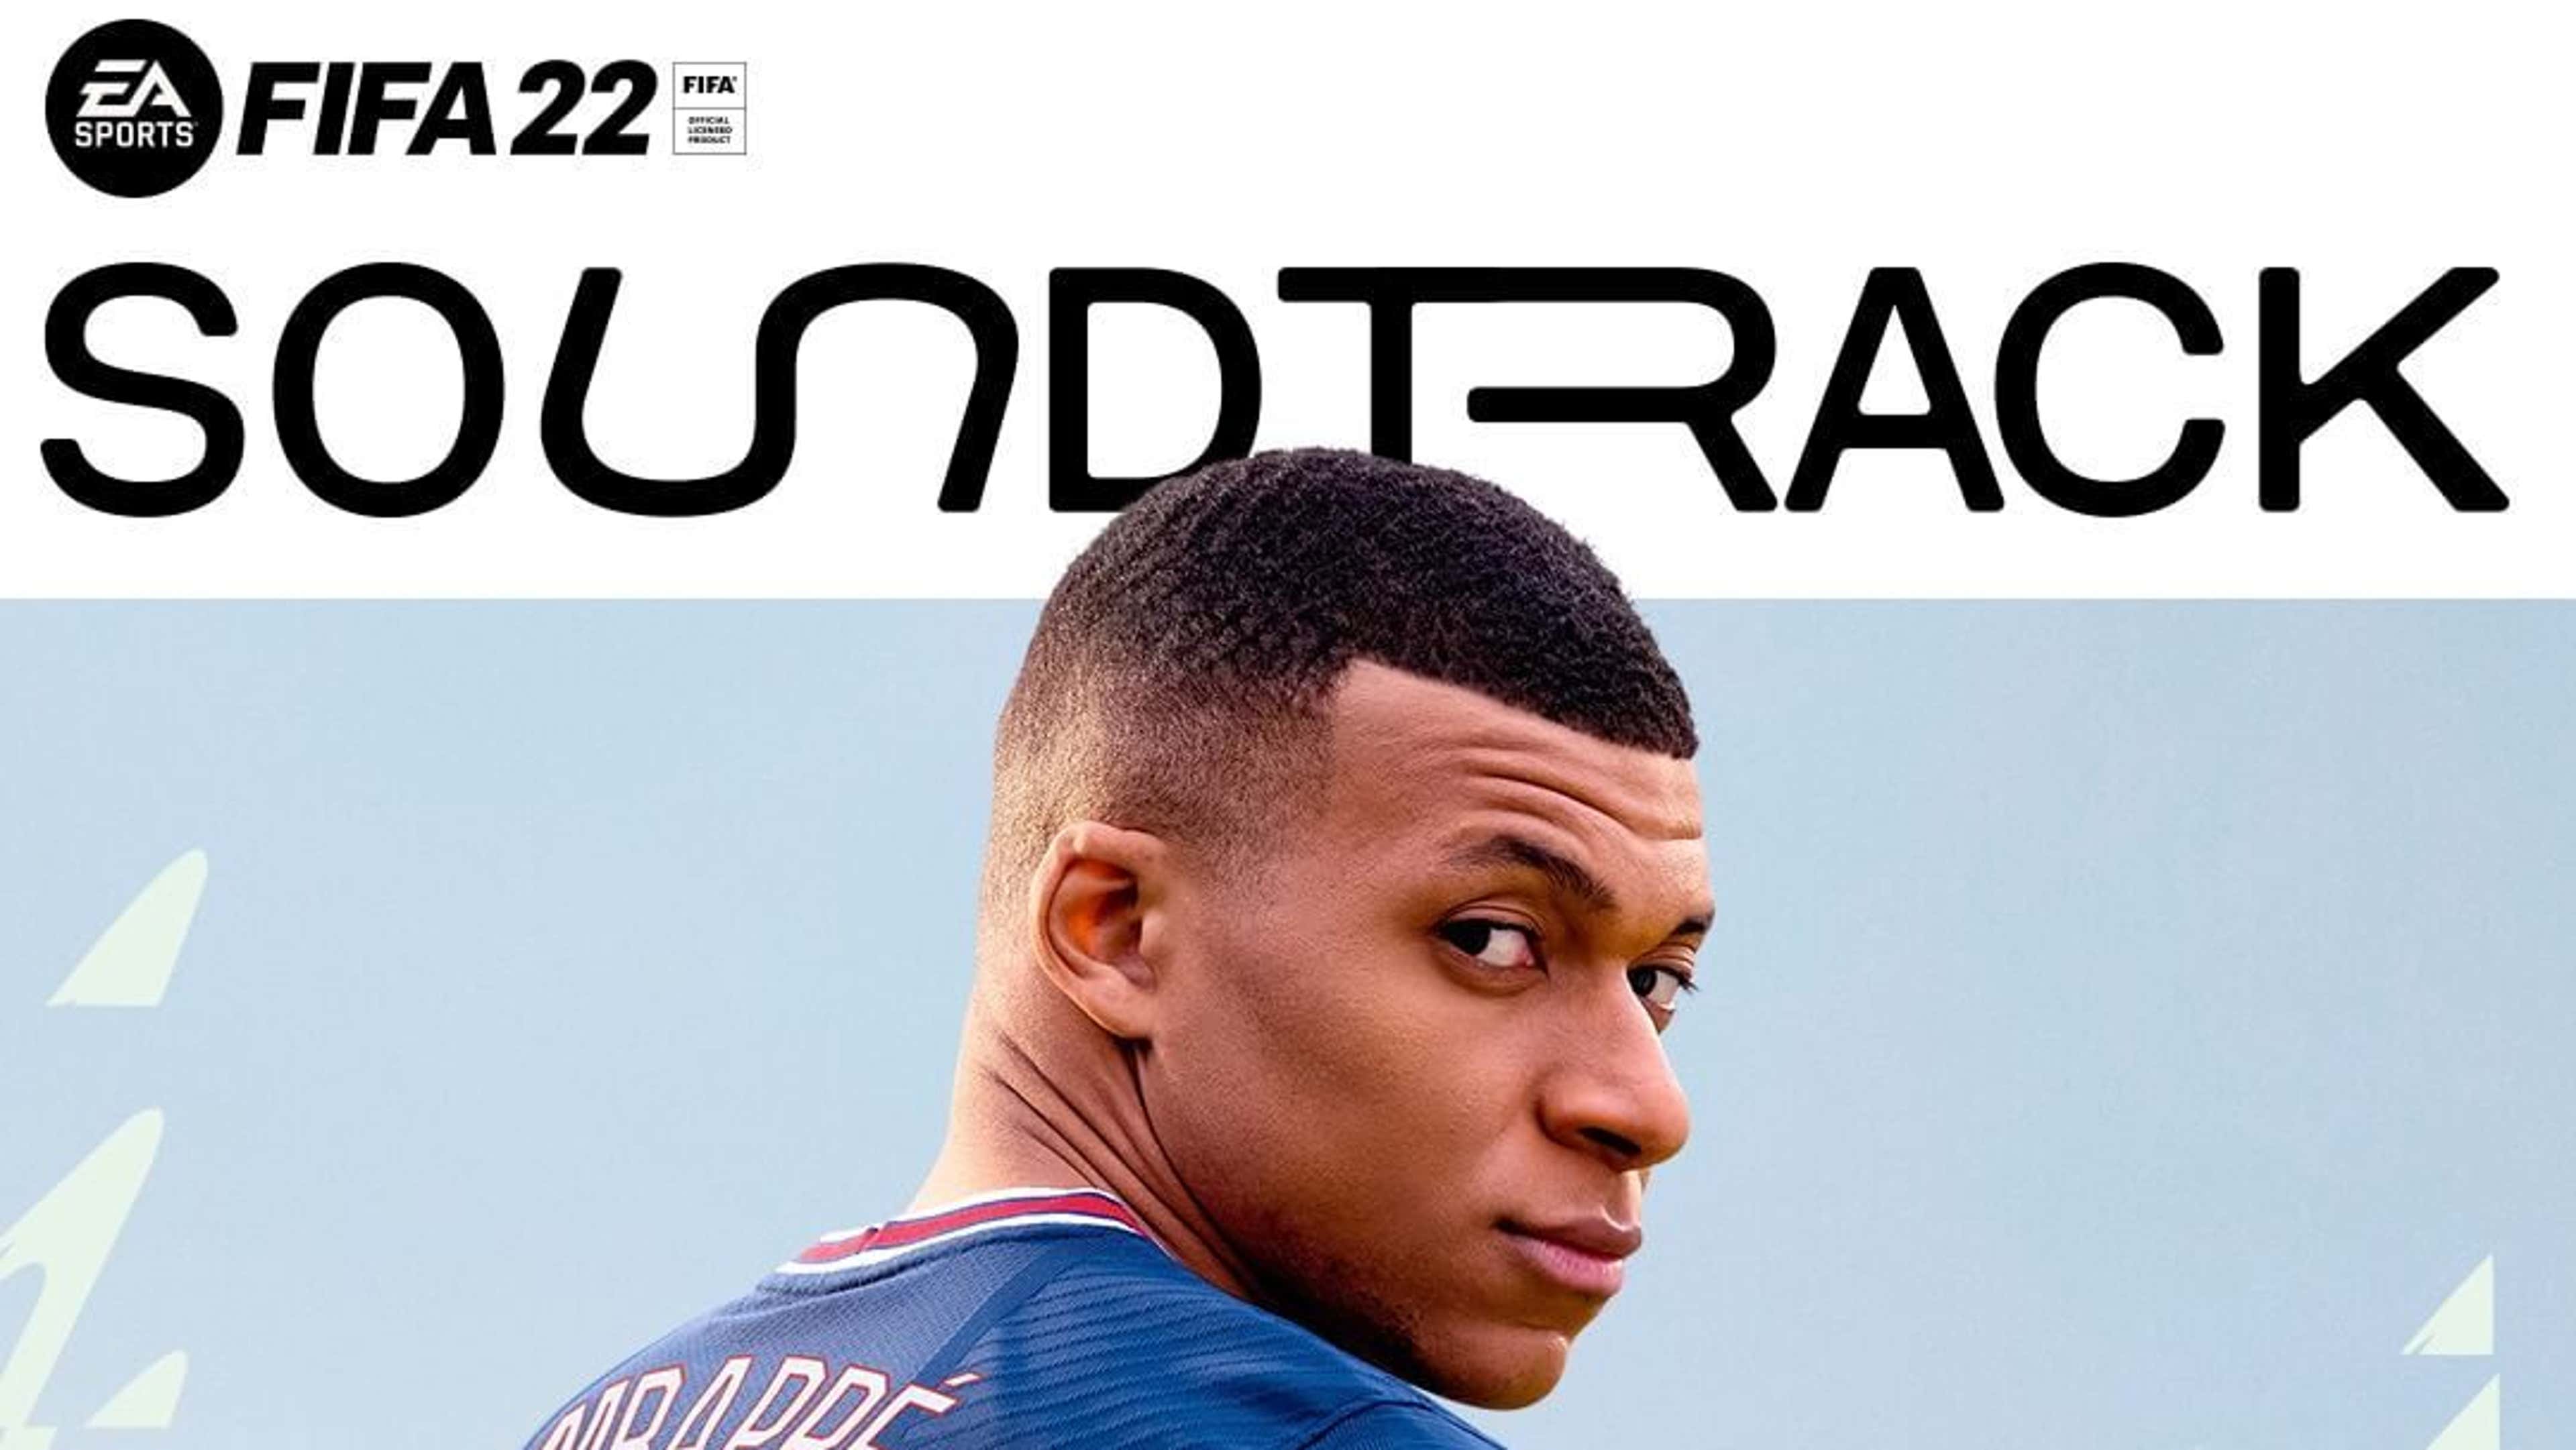 FIFA 22: Here's What Comes in Each Edition - IGN